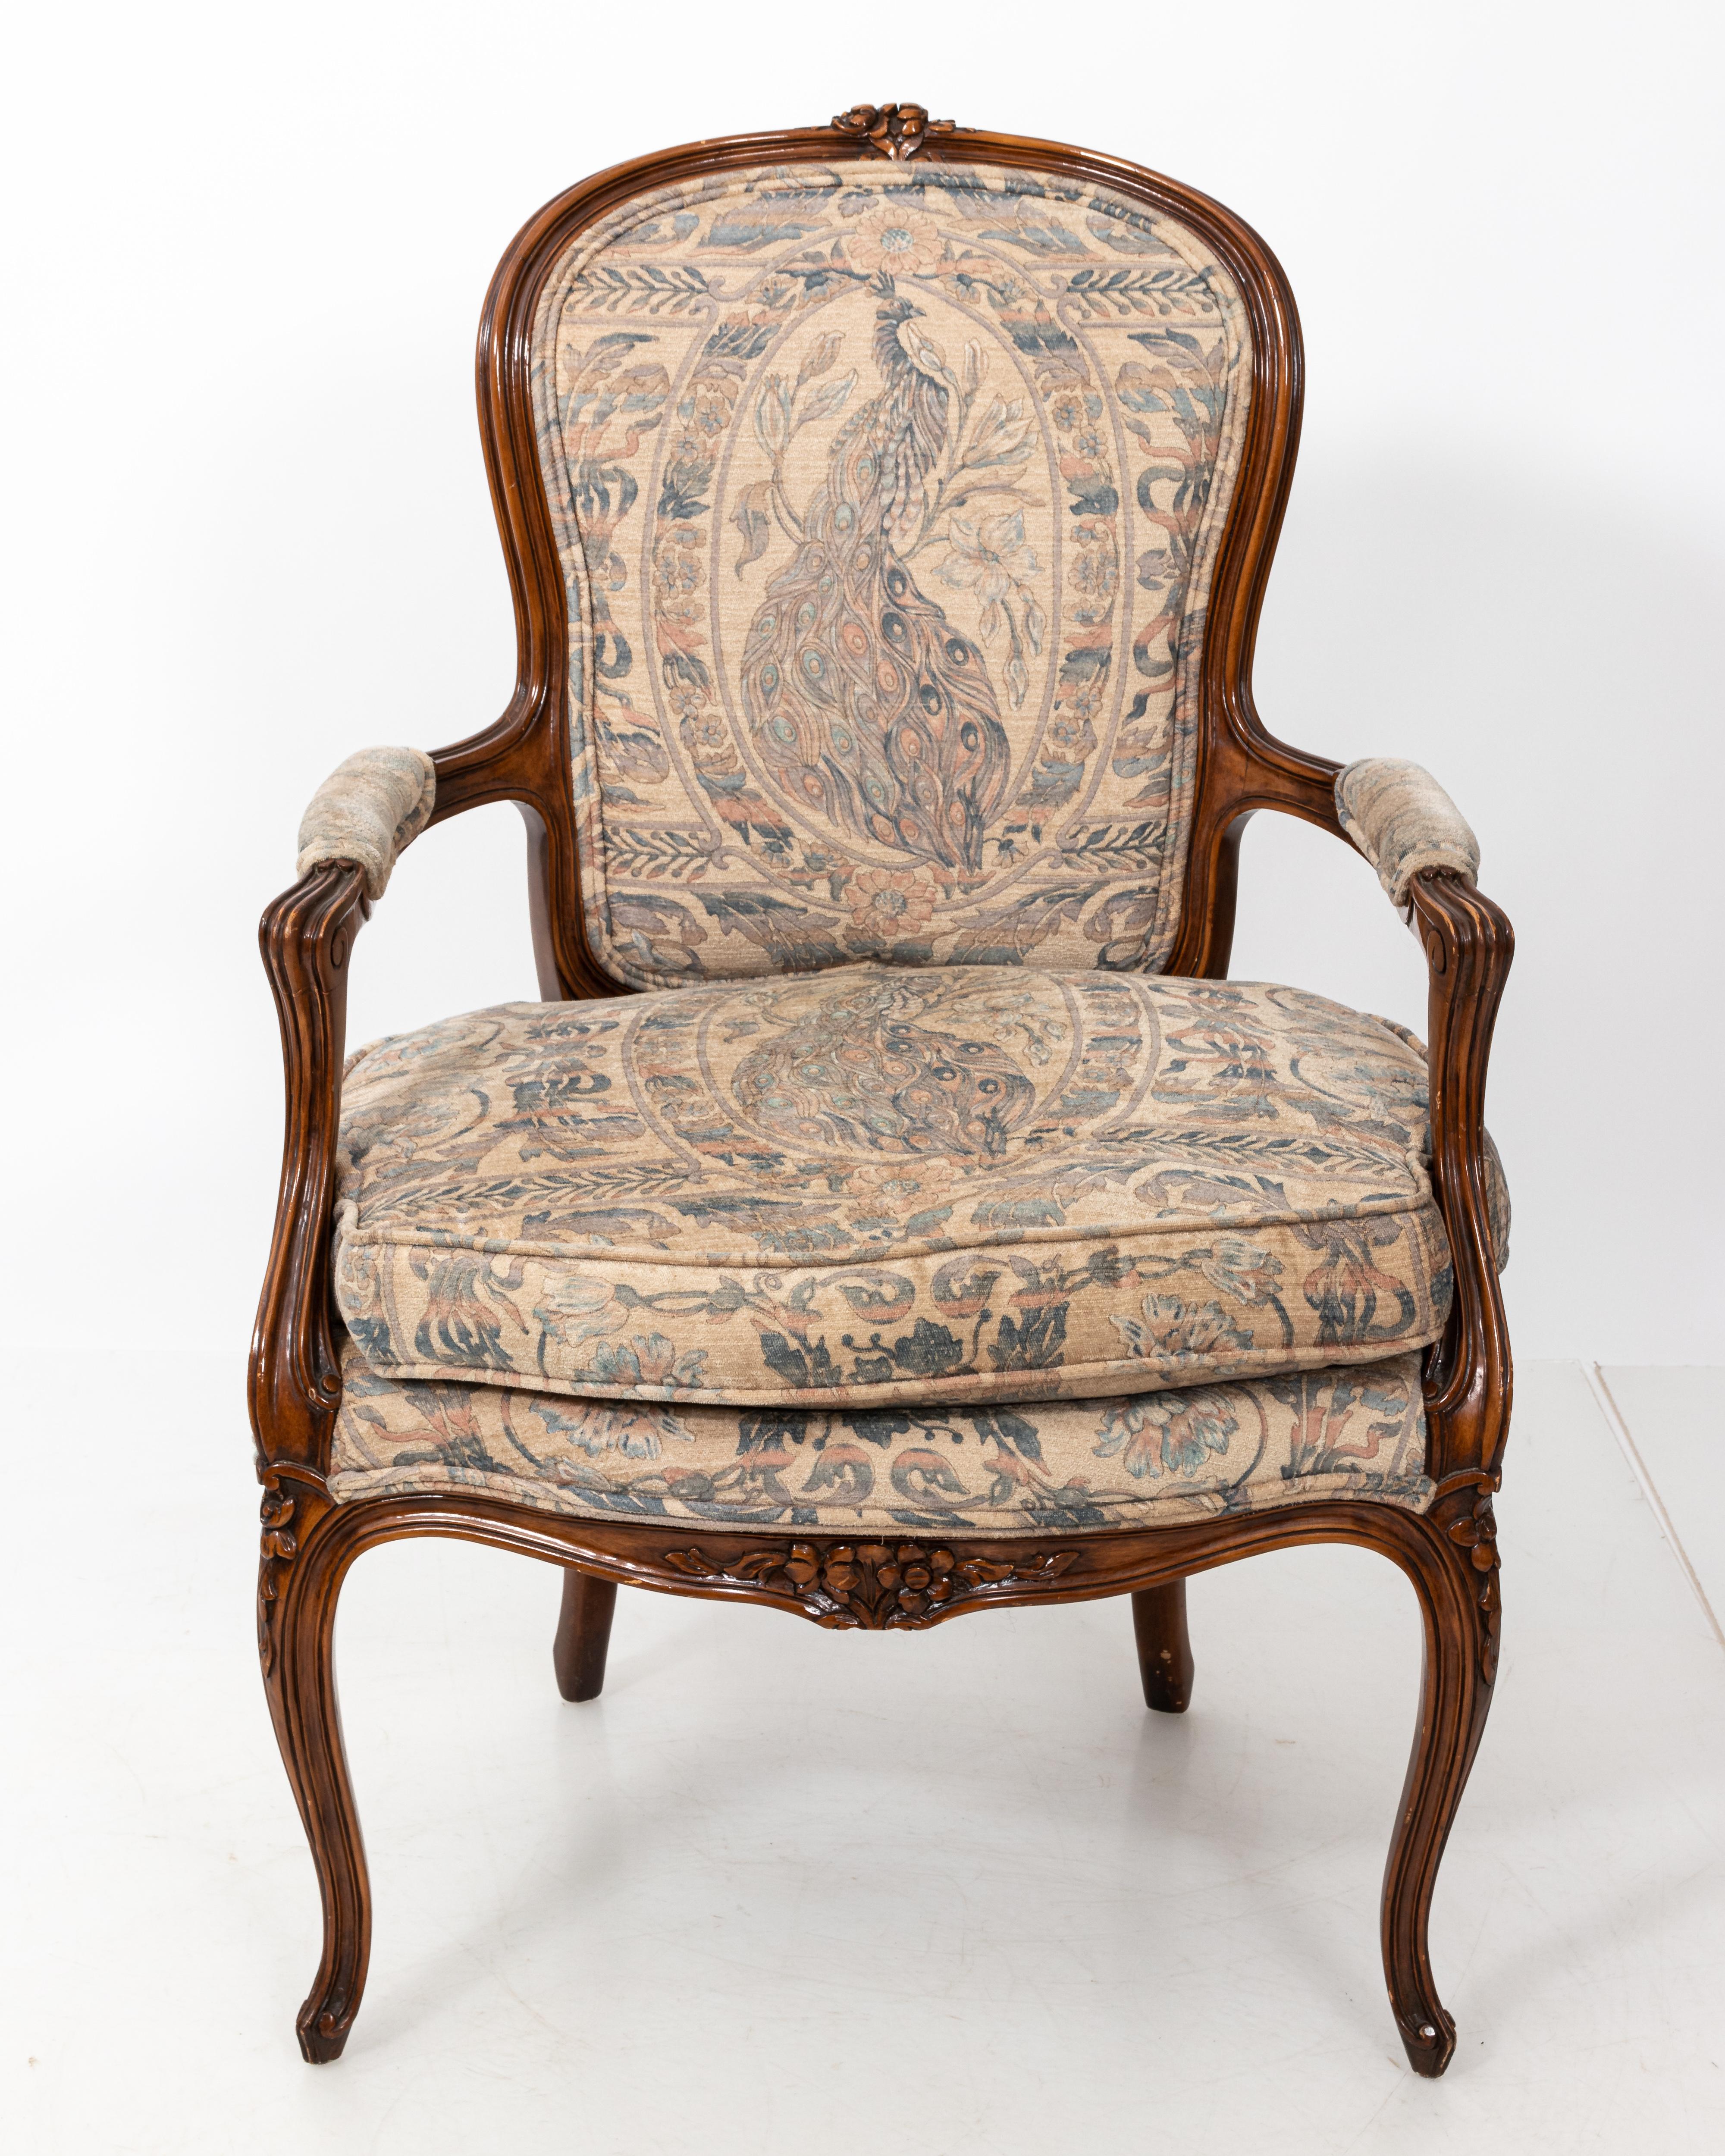 Pair of French style carved chairs in the Louis XV style. Sexy shape, Peacock upholstery. Some wear to finish.